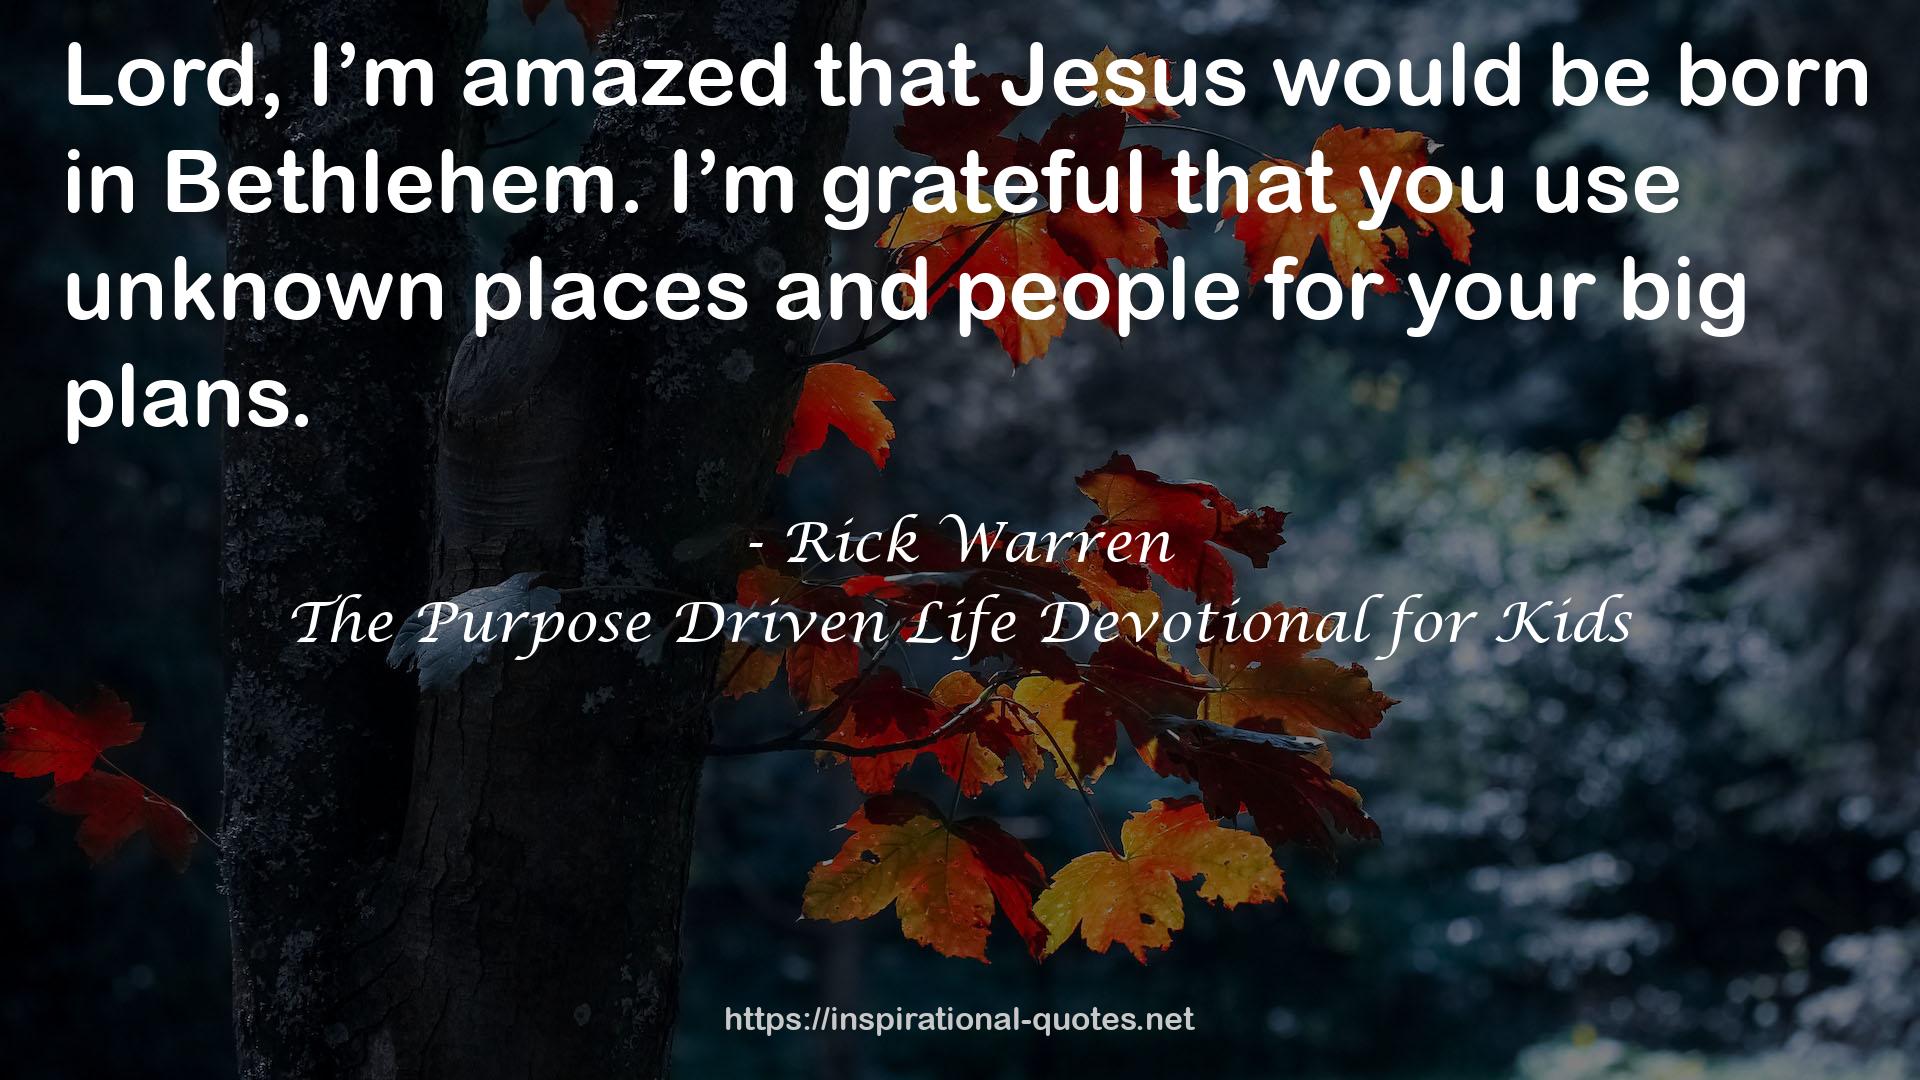 The Purpose Driven Life Devotional for Kids QUOTES